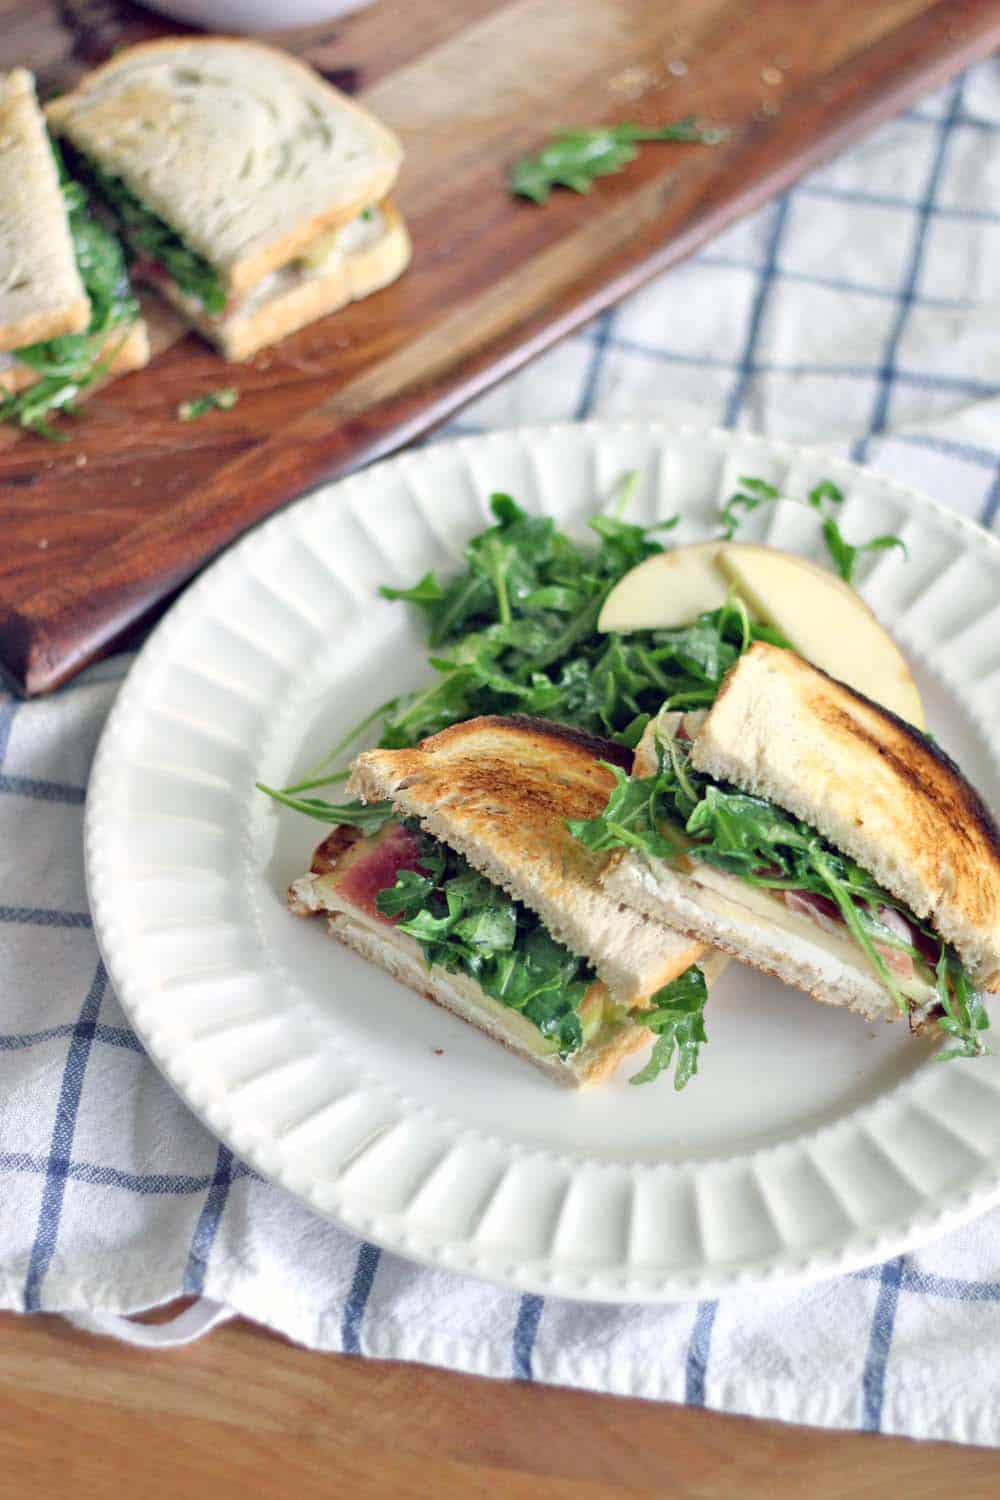 Apple and Prosciutto Sandwich with Goat Cheese and Arugula | This sandwich is the PERFECT combination of sweet, salty, tangy, and peppery. It takes 5 minutes to make and it's light and healthy, but will leave you feeling full and satisfied!